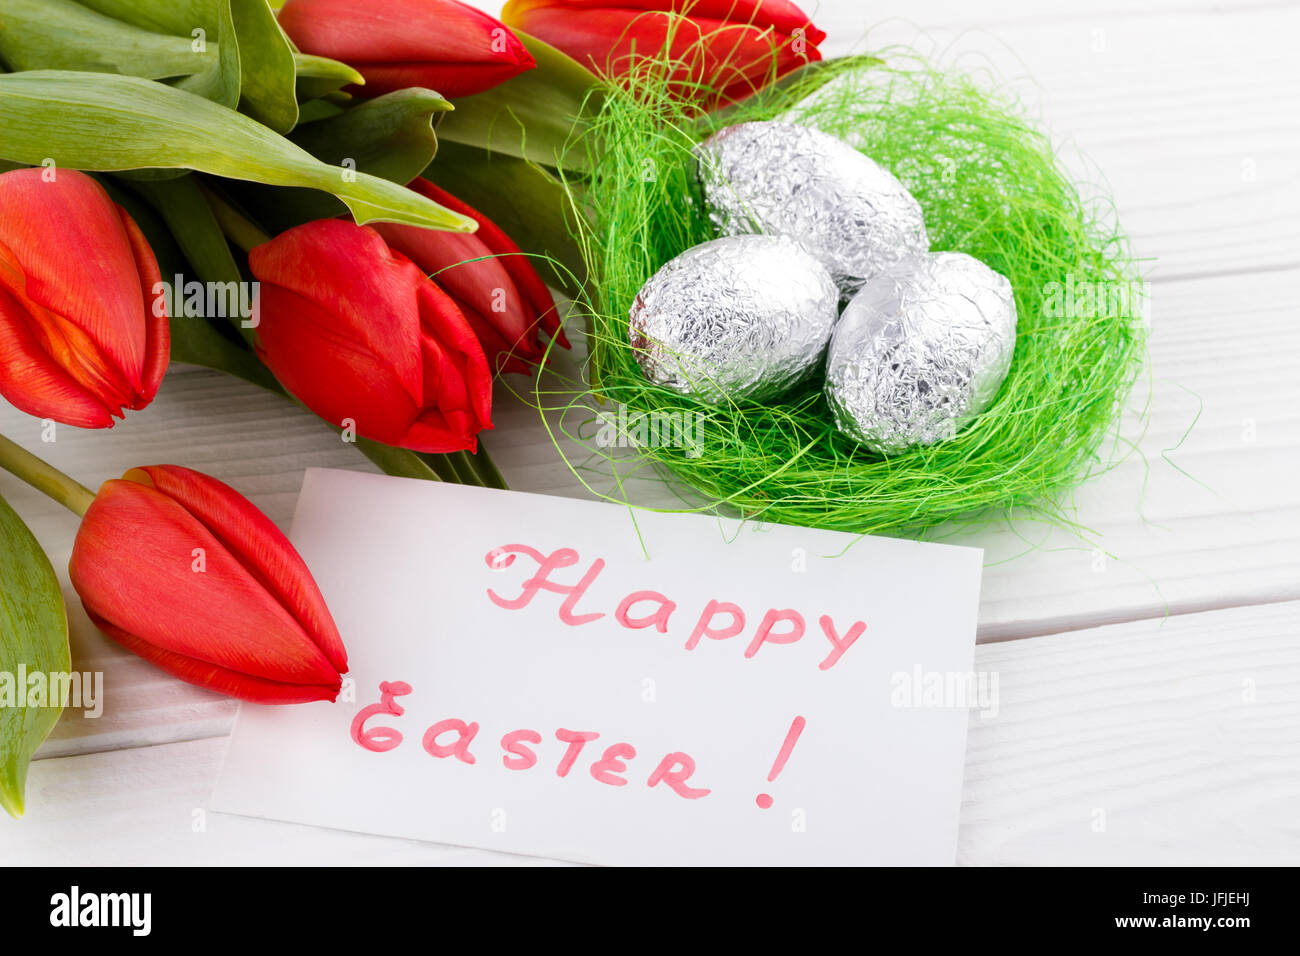 Easter greetings card Stock Photo